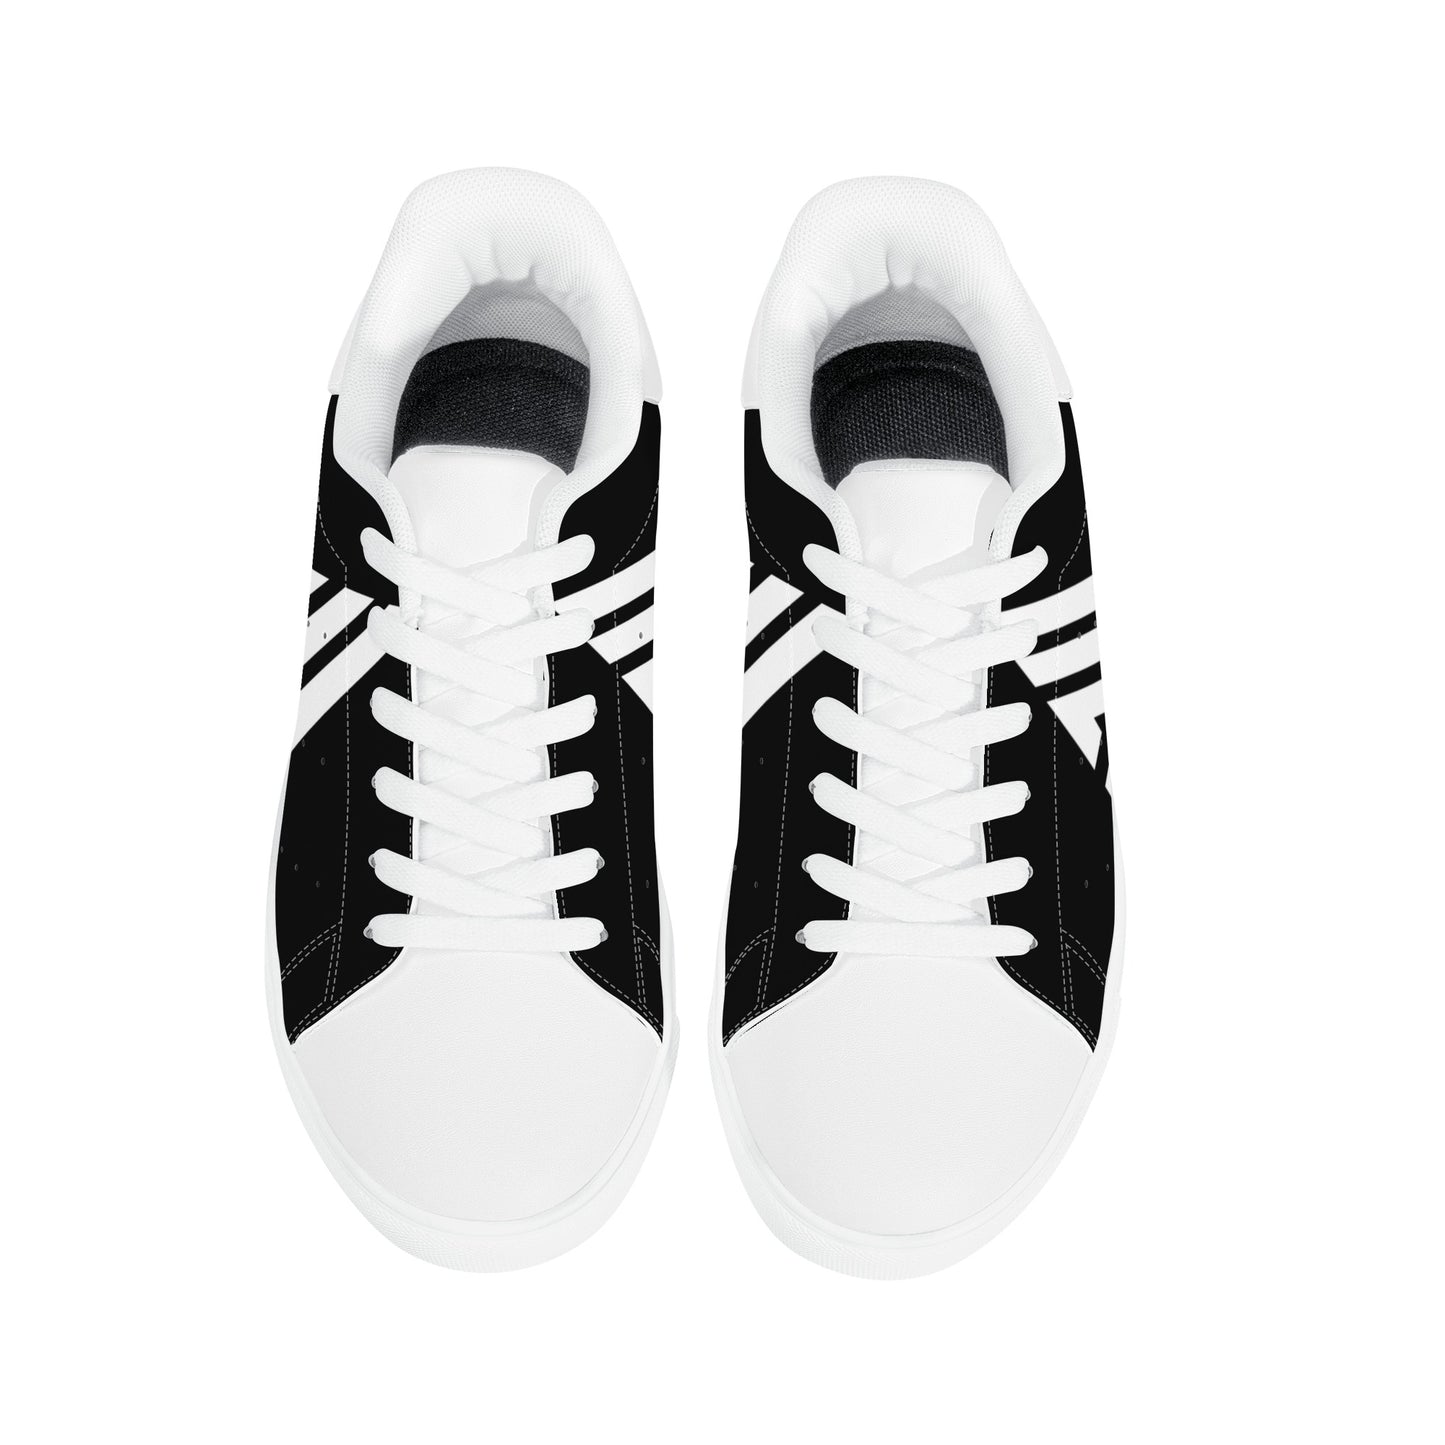 Rongoworks Astacos Vegan Leather Sneakers Rongoworks